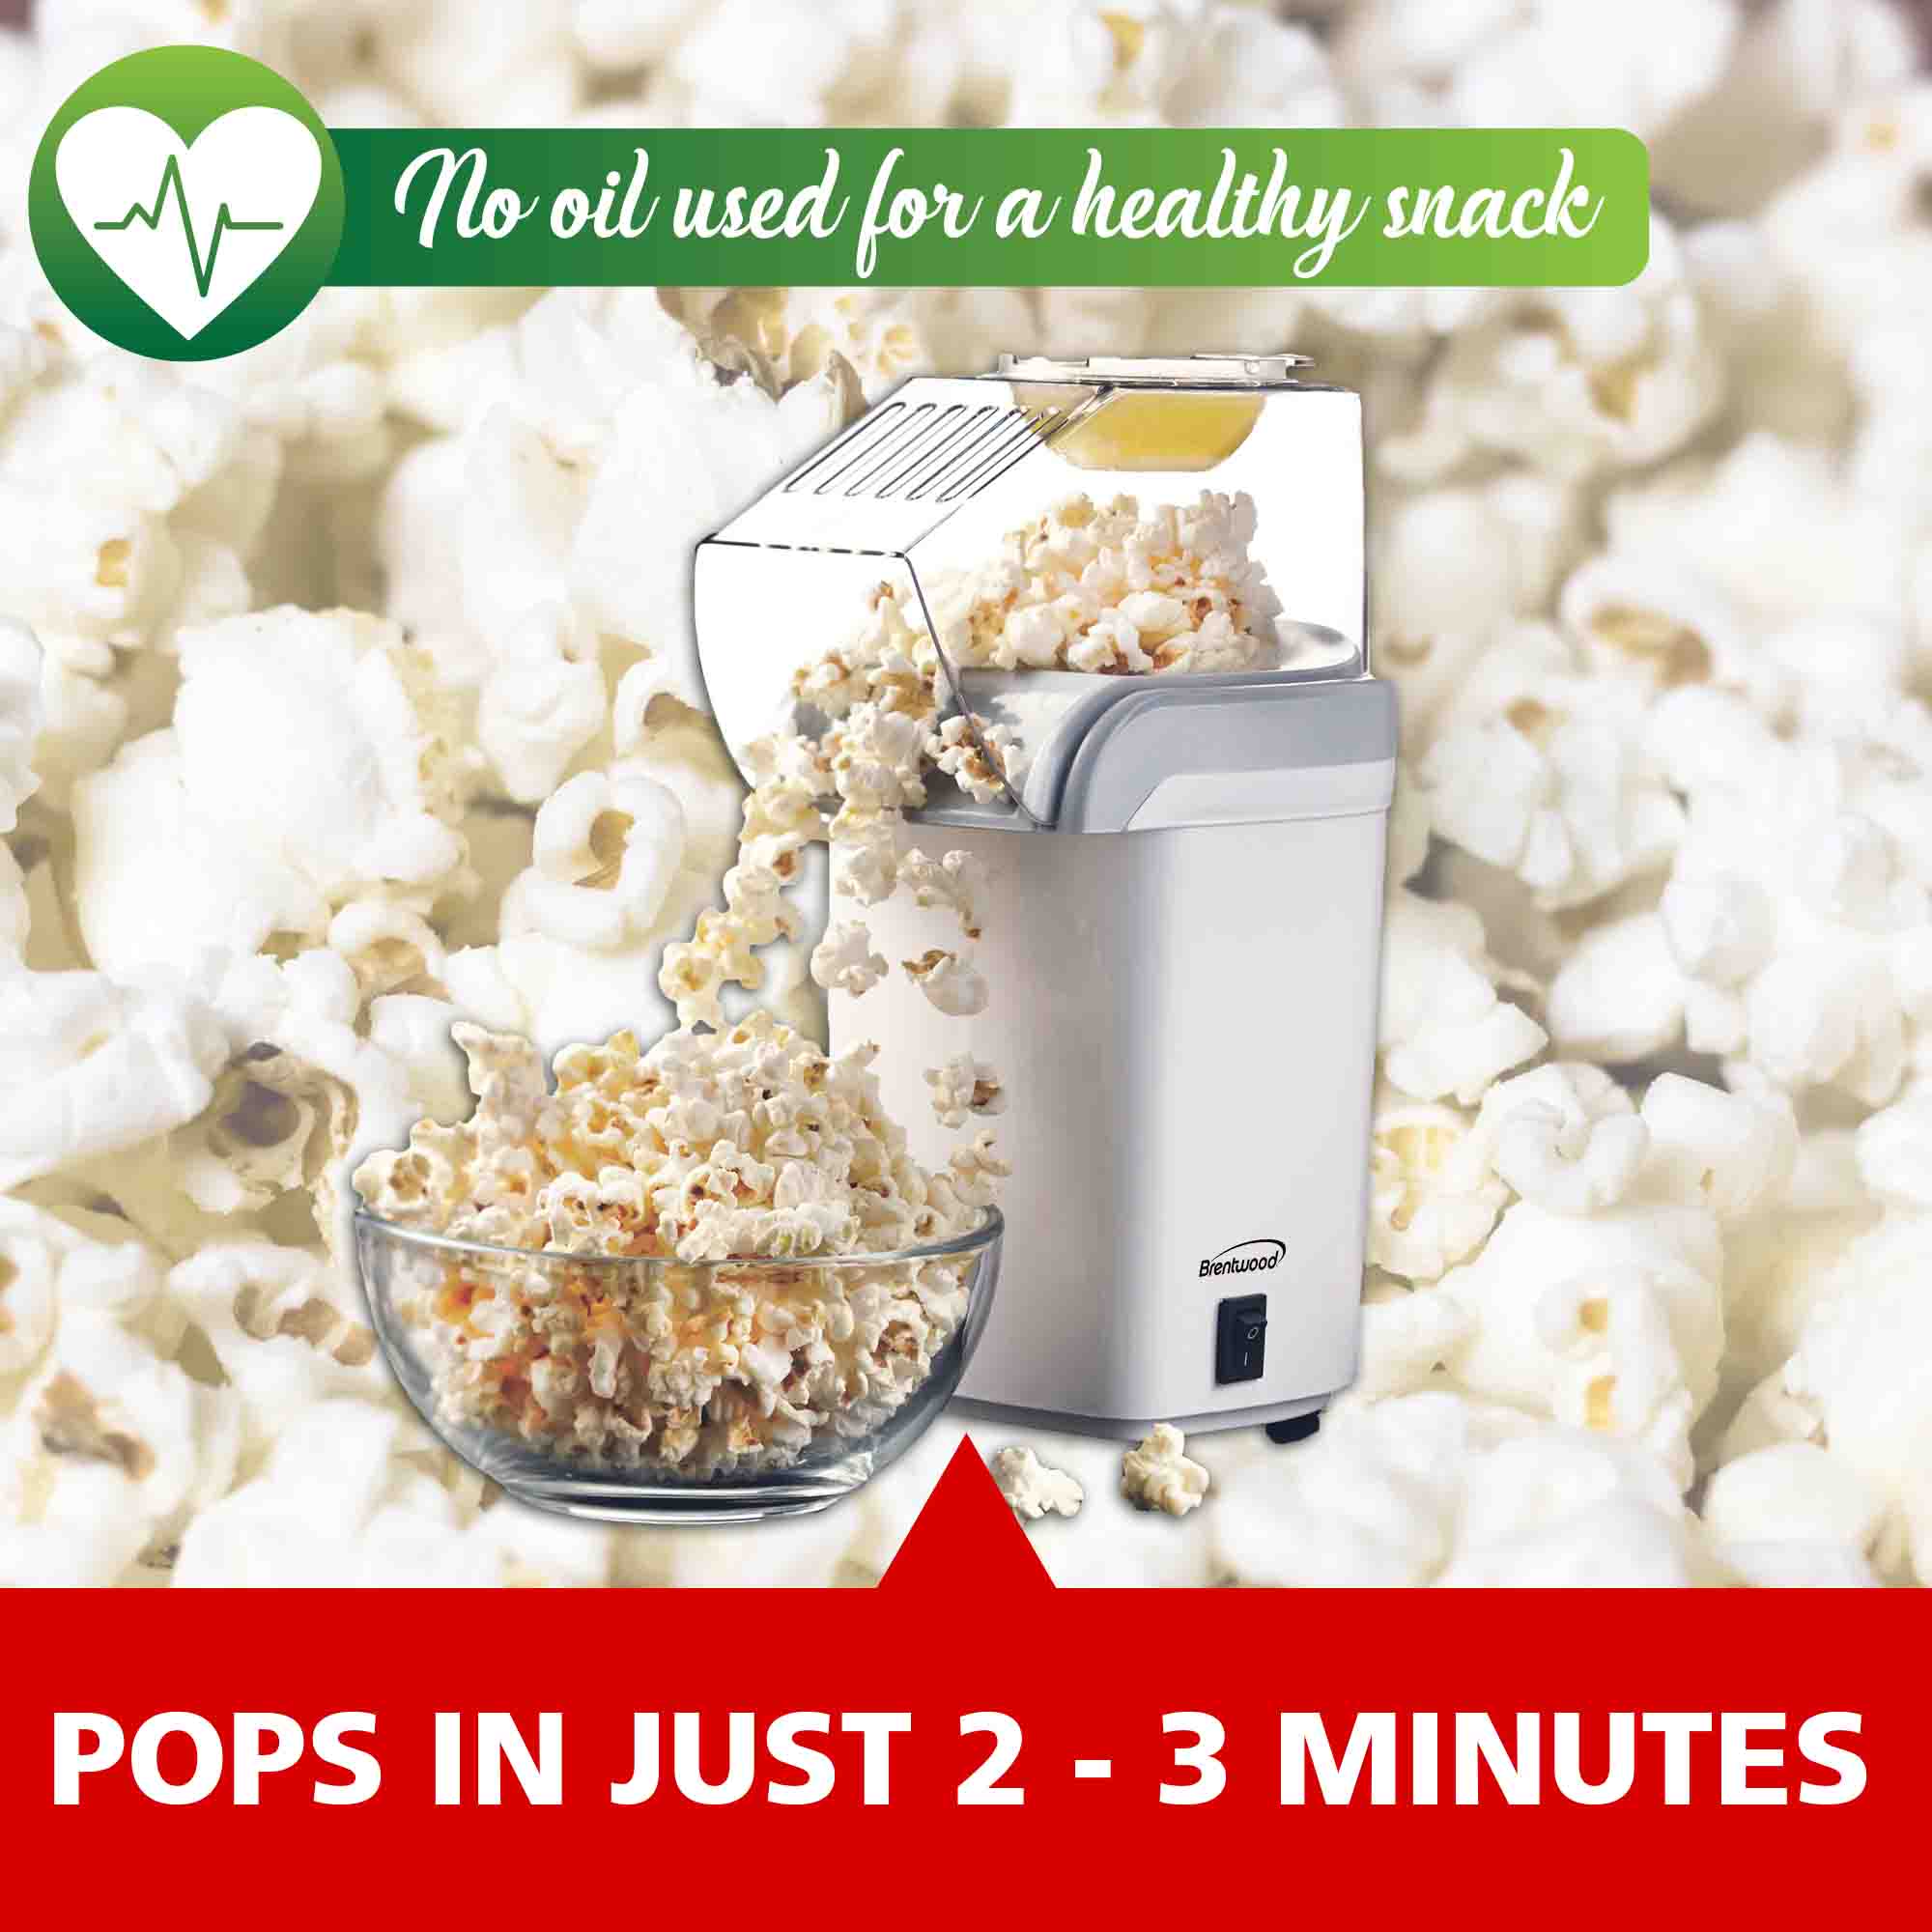 Brentwood Hot Air Popcorn Maker, 10-1/2H x 7-1/2W x 5D, Red